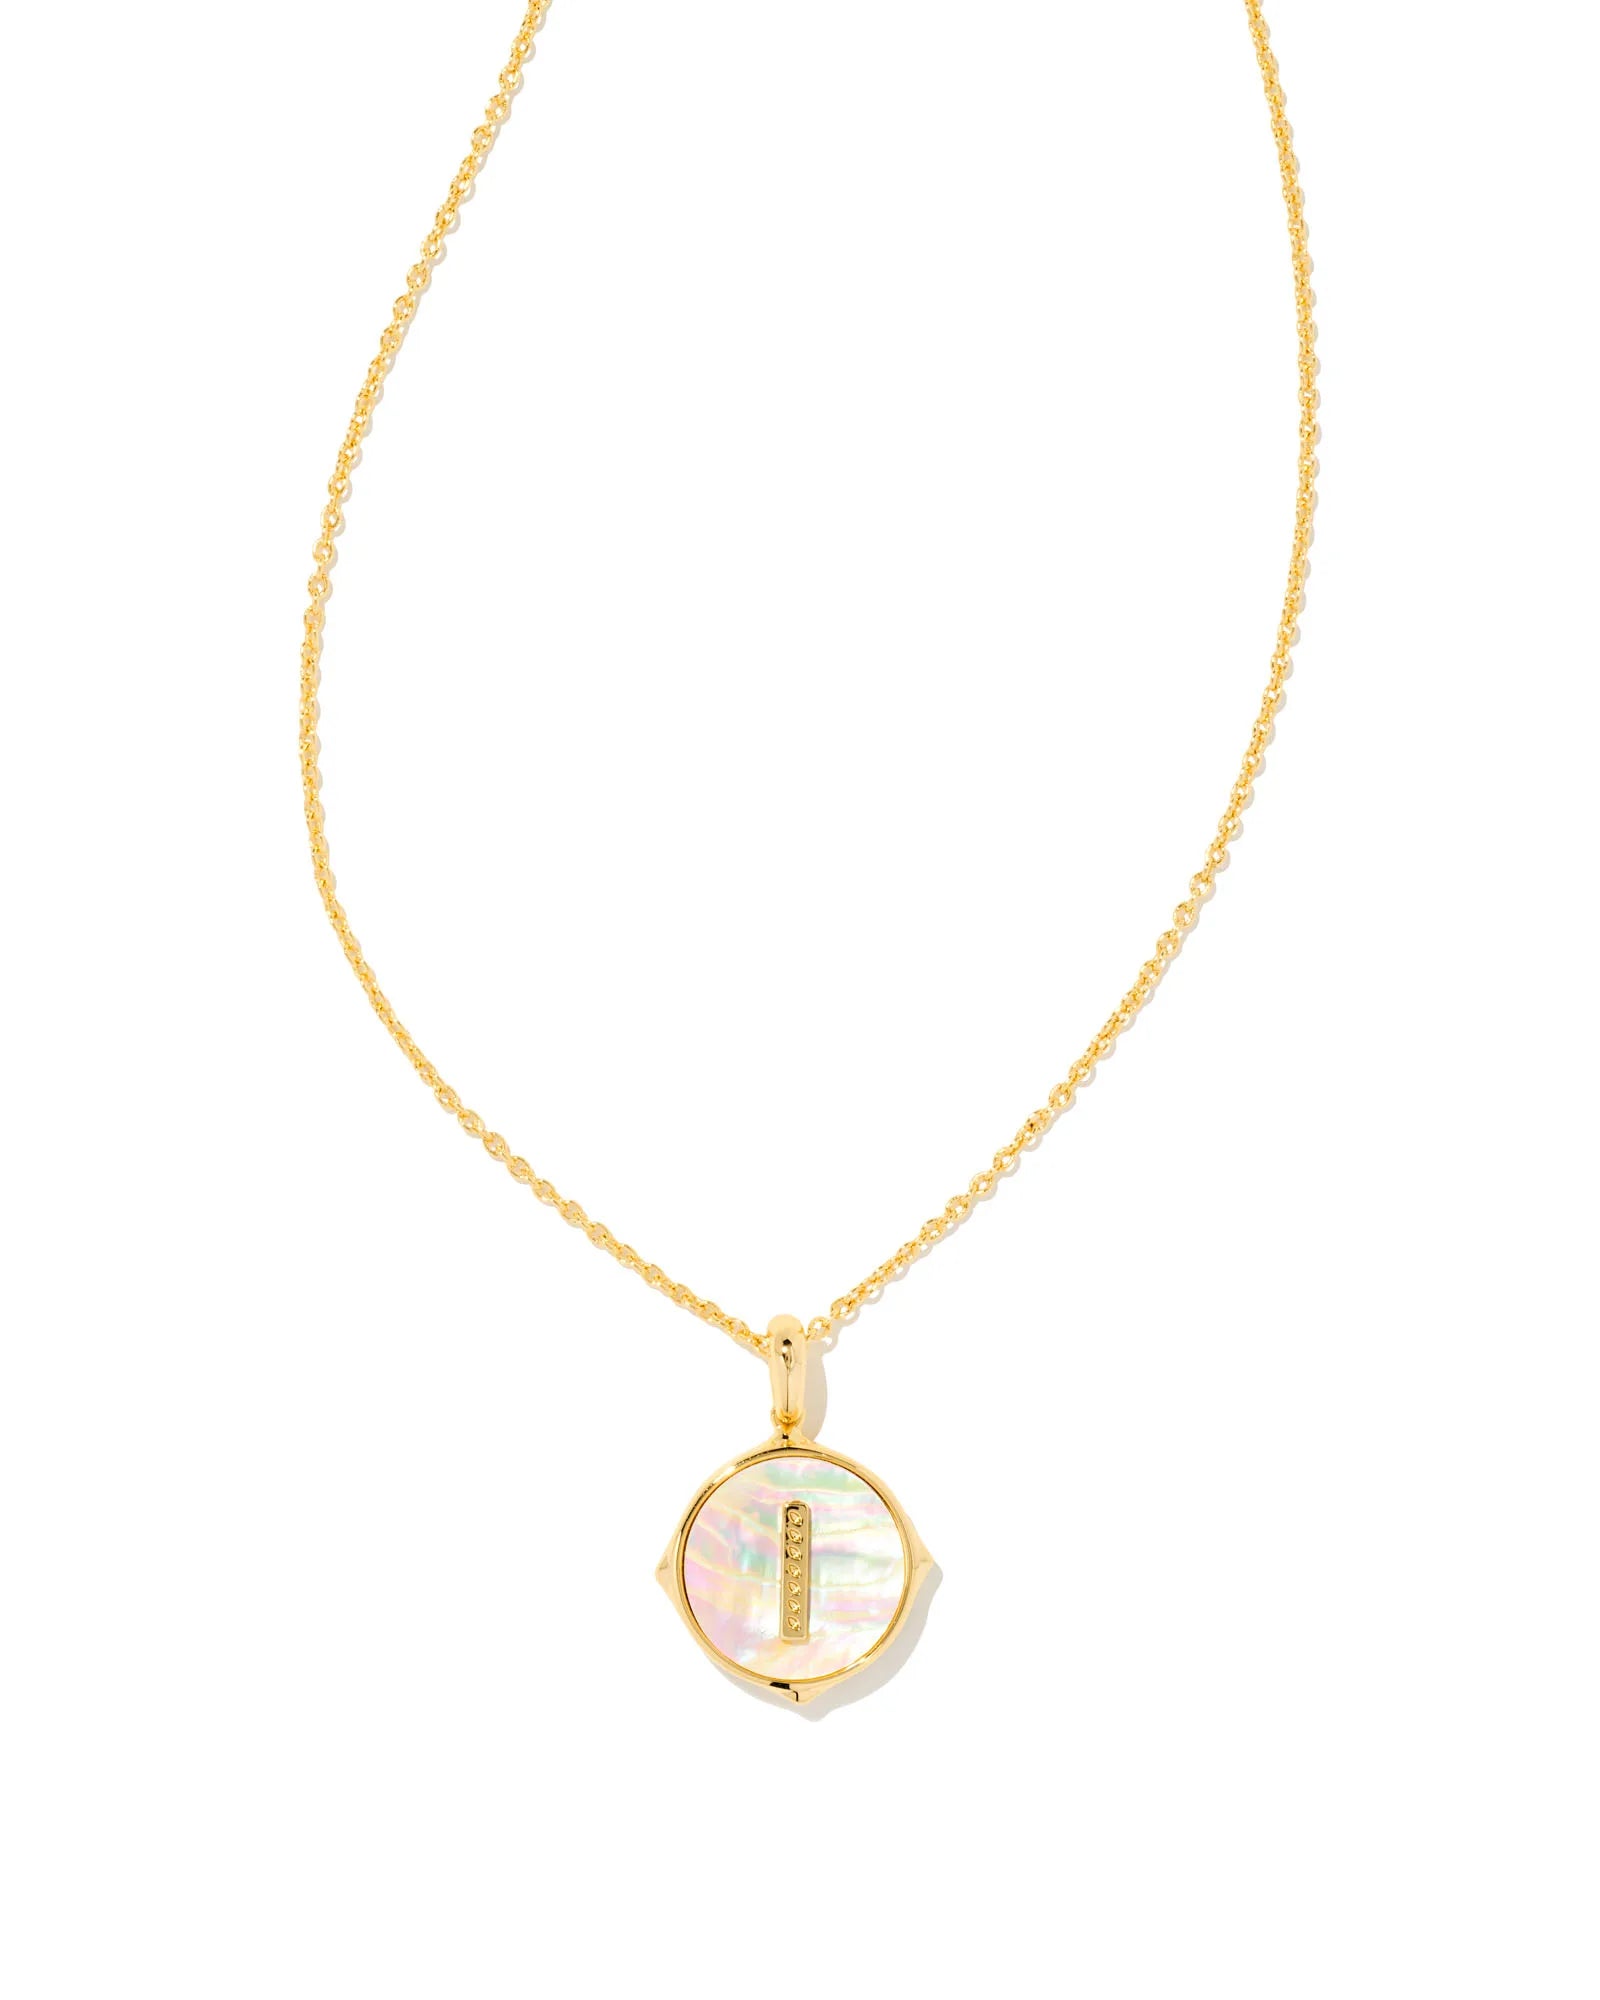 LETTER I DISC PENDANT NECKLACE GOLD IRIDESCENT ABALONE